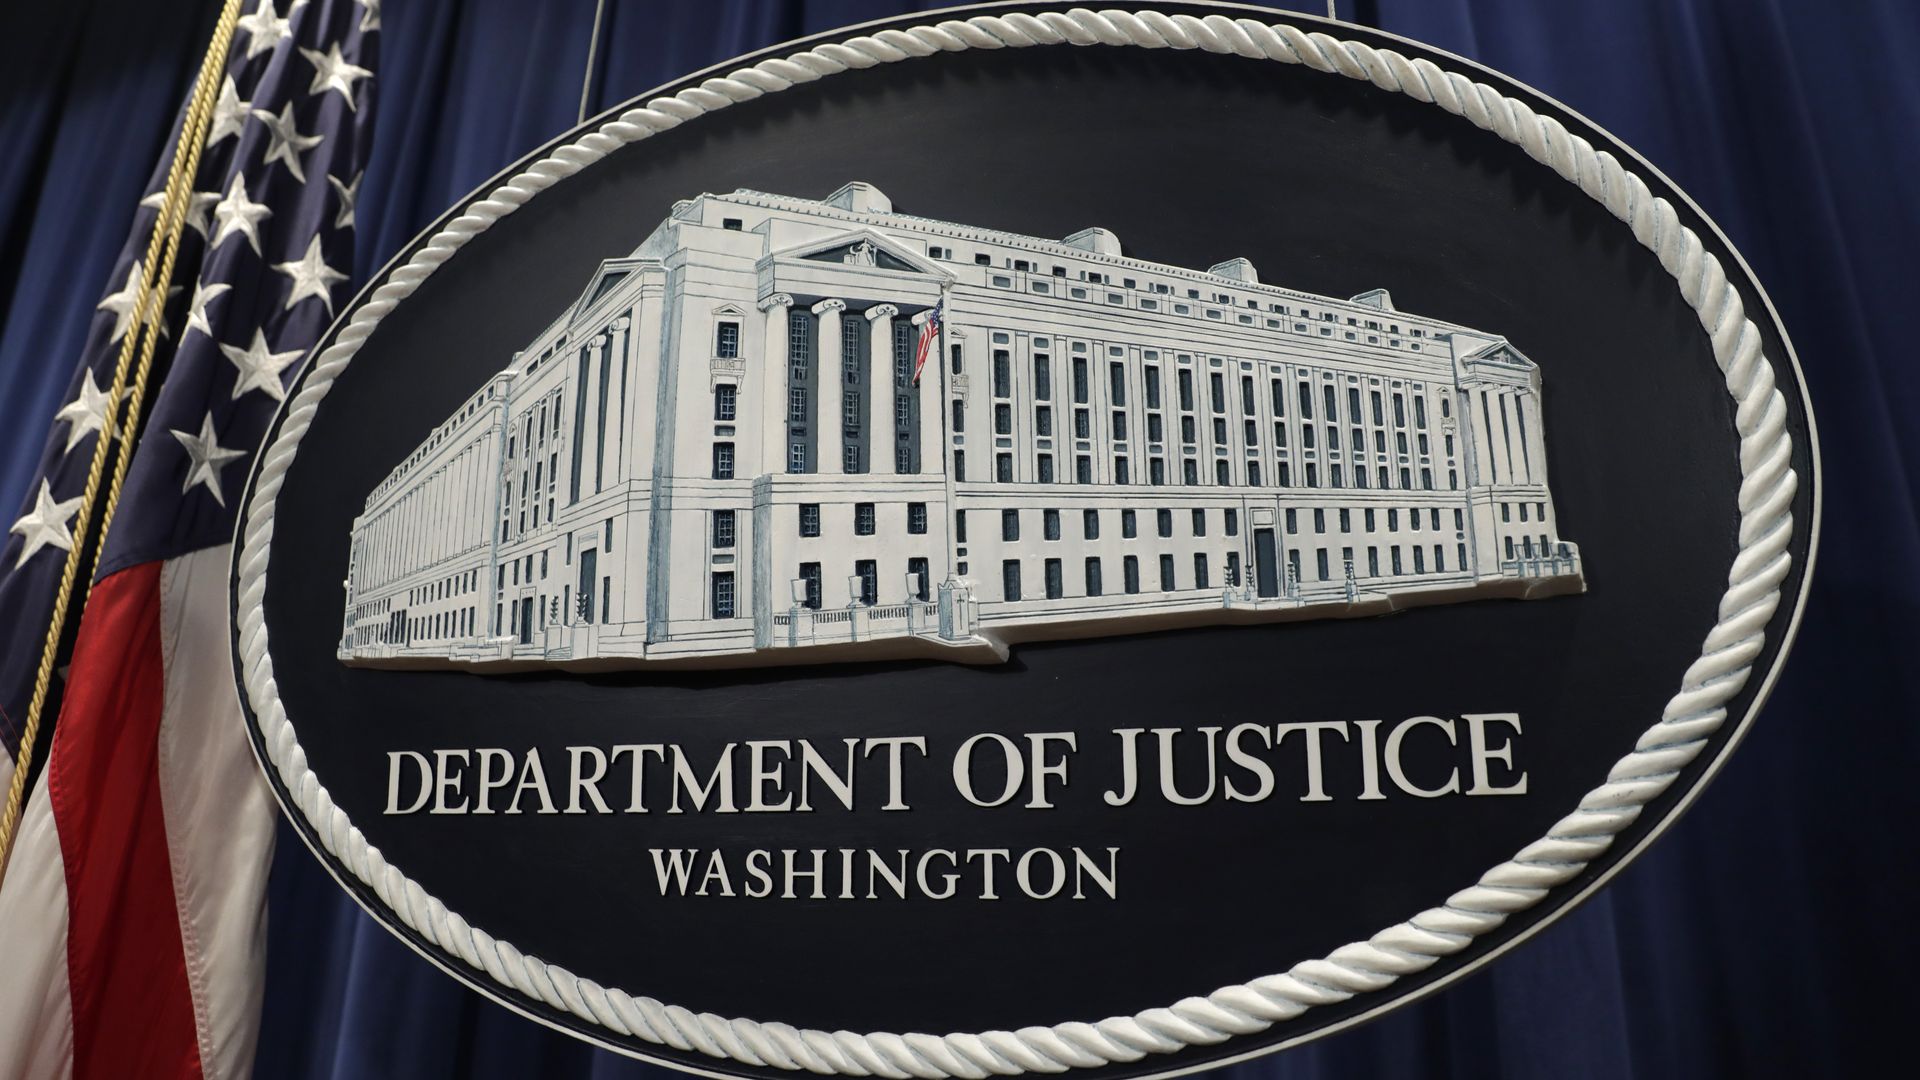 The U.S. Department of Justice seal is displayed following a news conference with Rod Rosenstein, deputy attorney general, not pictured, in Washington, D.C., U.S. on Thursday, Dec. 20, 2018